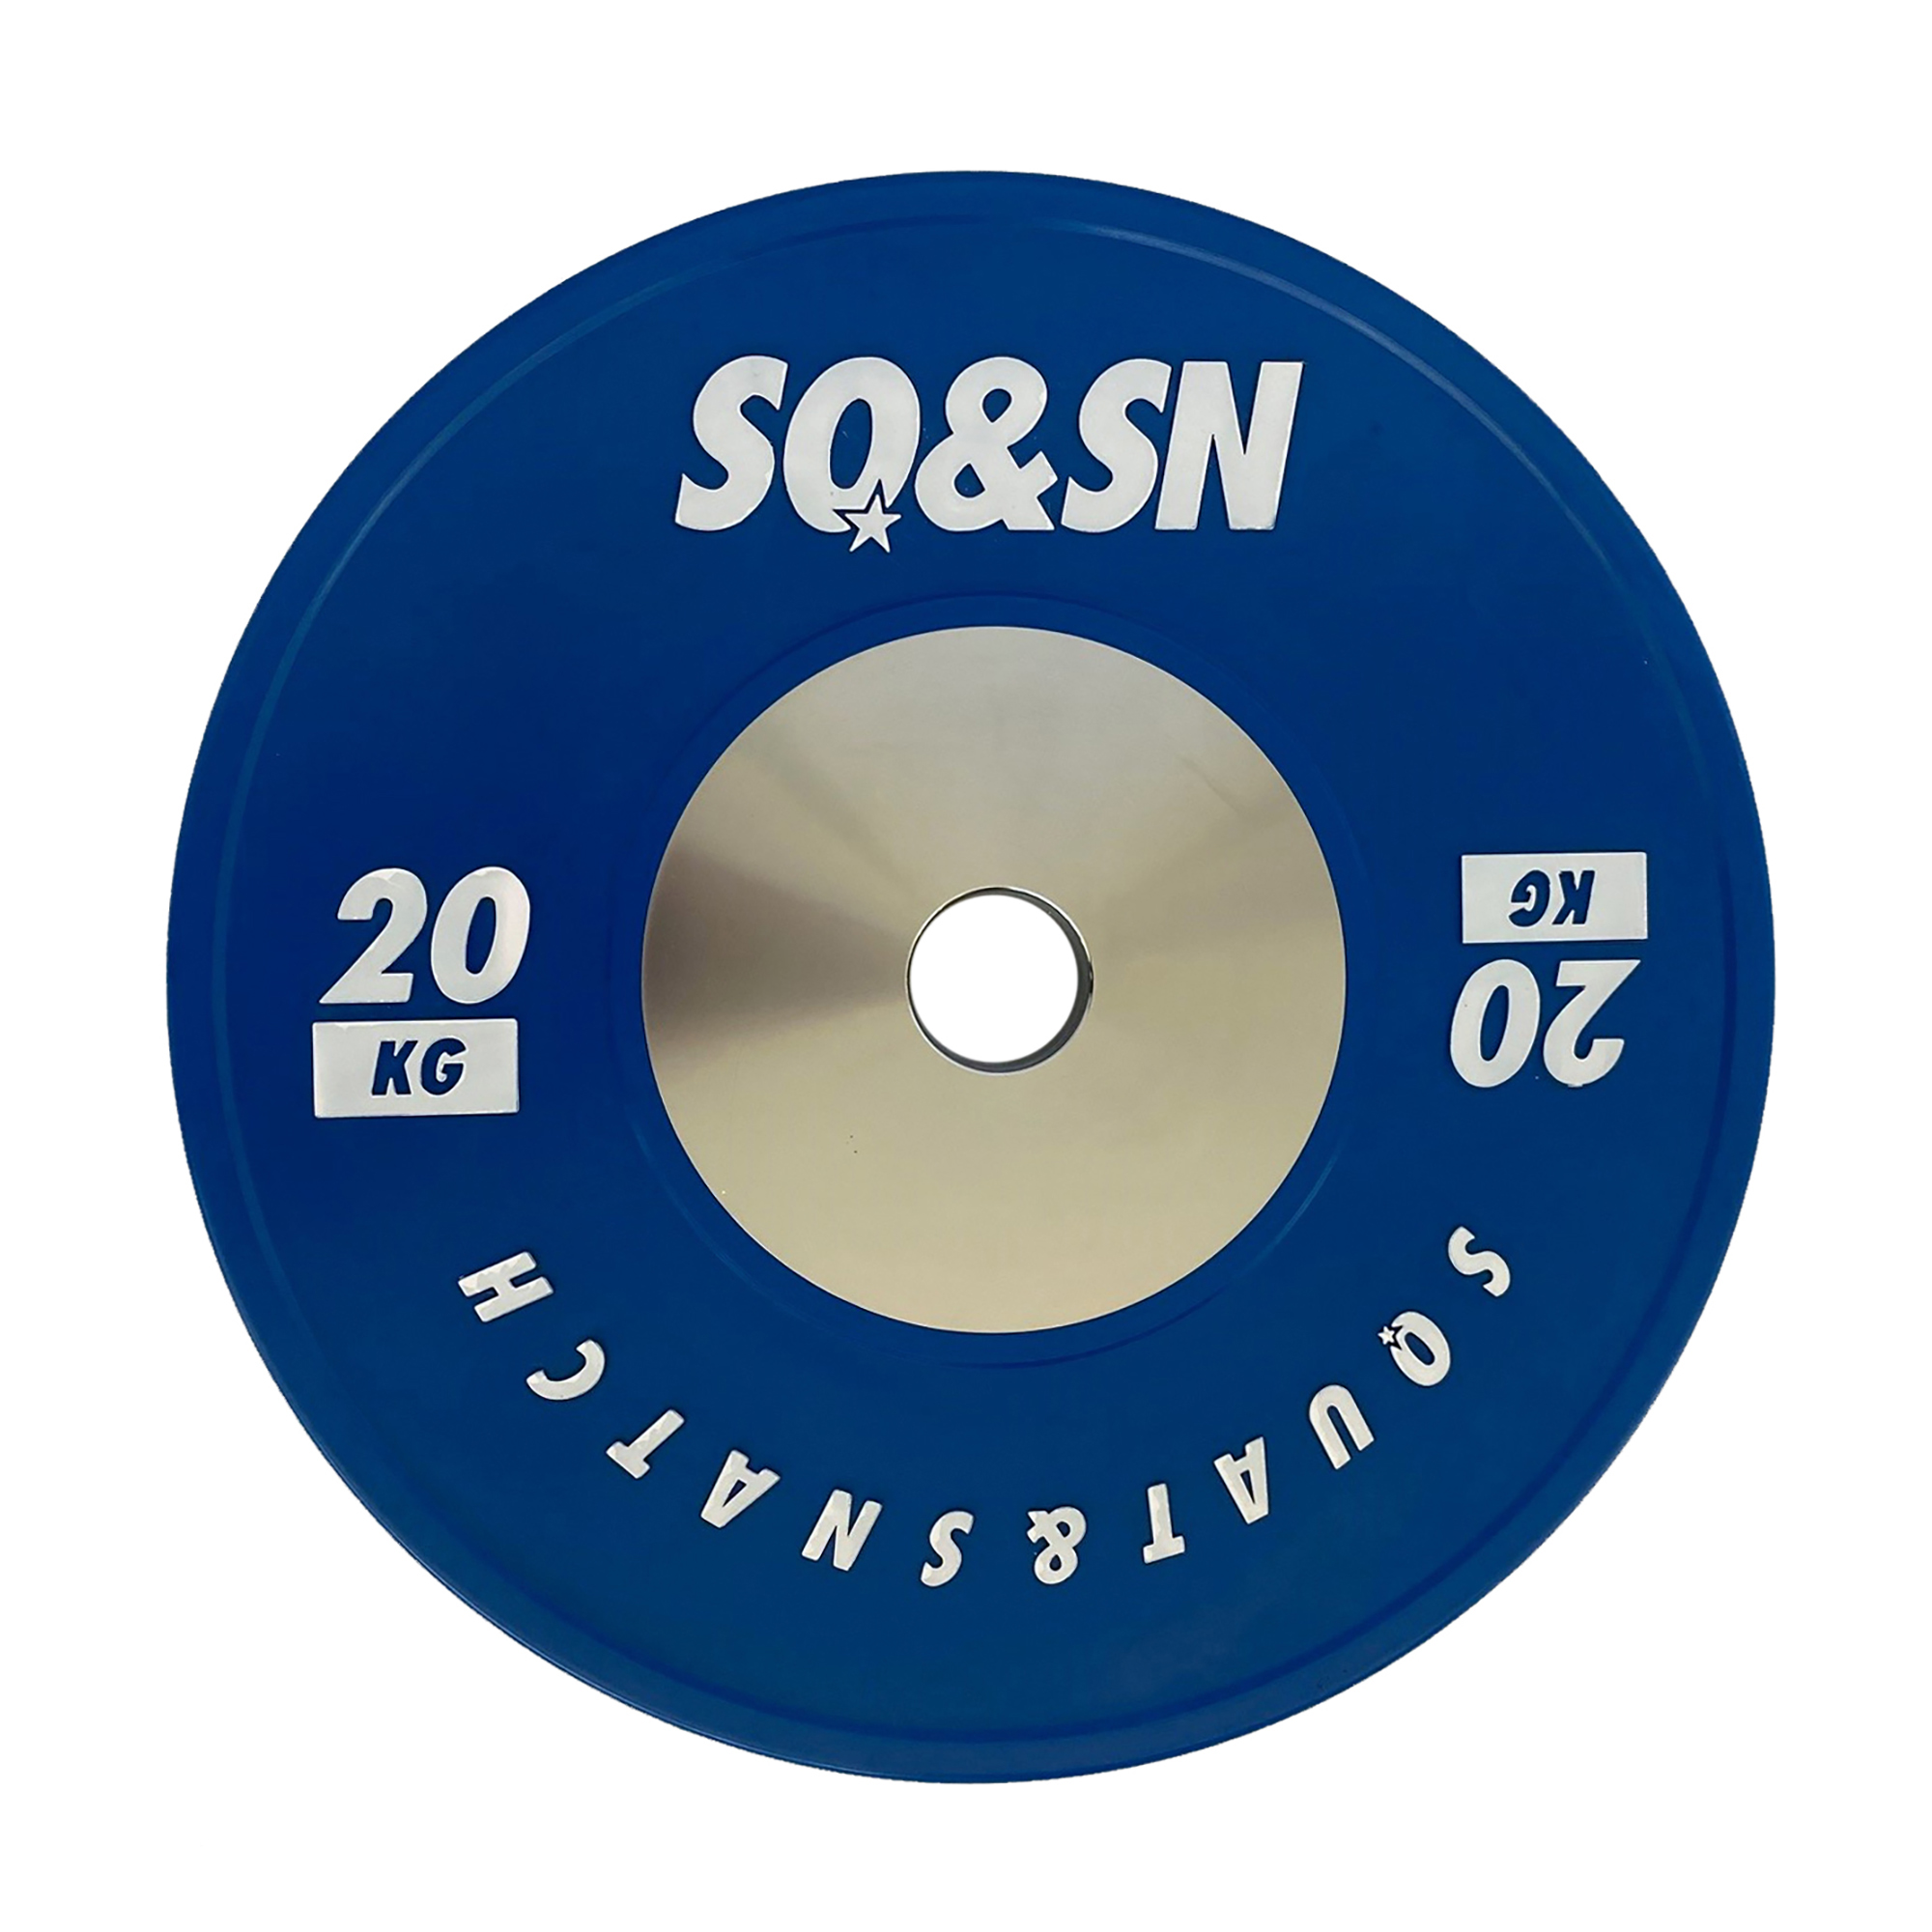 SQ&amp;SN Competition Bumper Plate 20 kg Blue - Demo